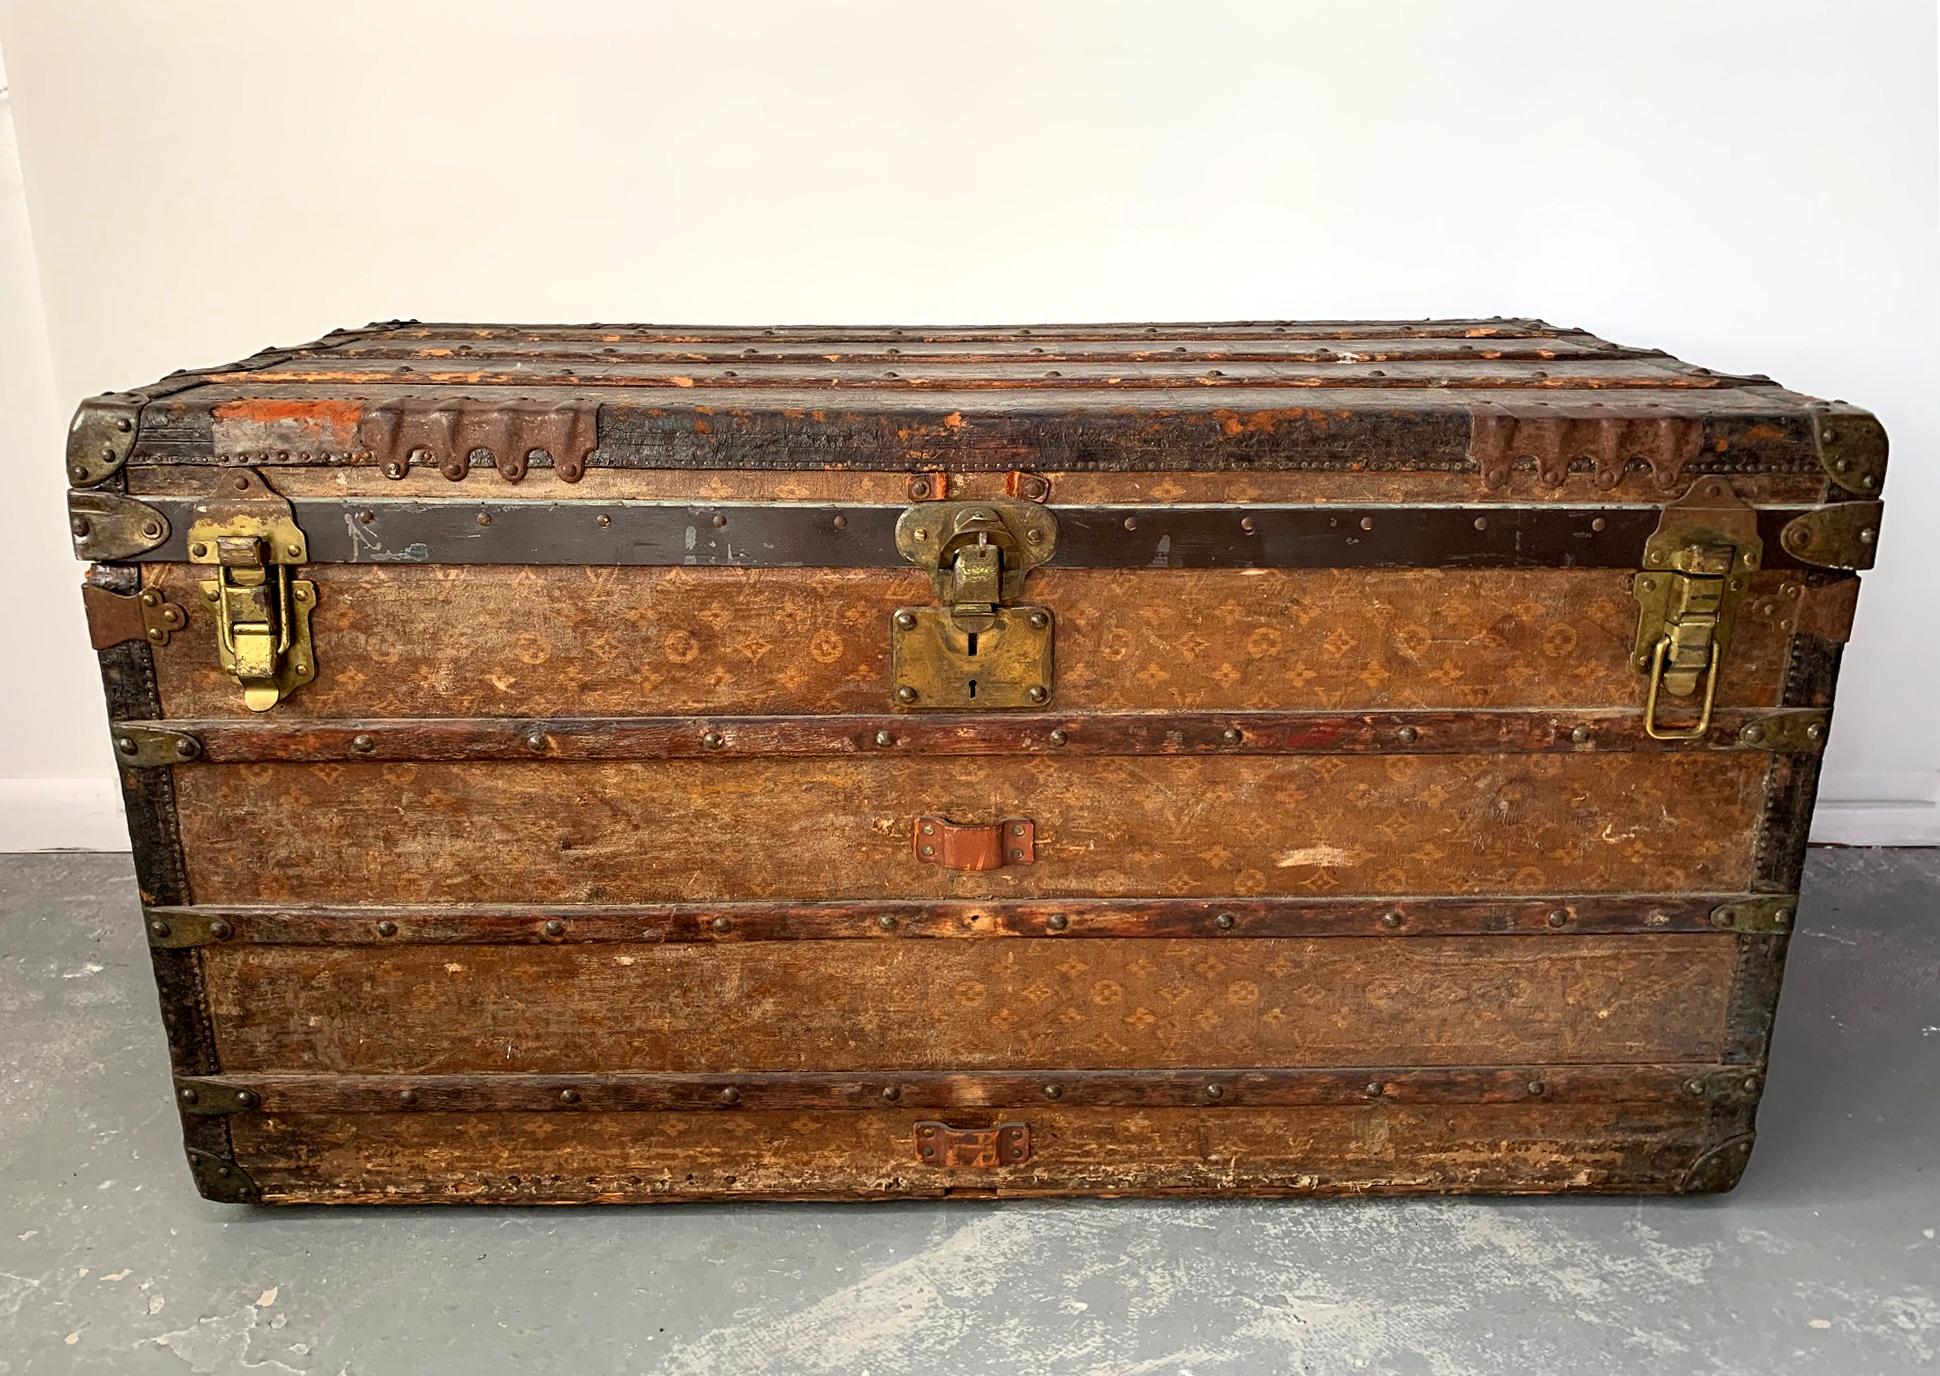 A large vintage Louis Vuitton steamer trunk. Early production from turn of the century (after 1896 with the presence of the LV logo, and likely before 1910). From the descendants of James J. and Mary T. Hills. James Jerome Hill (1838-1916), was a